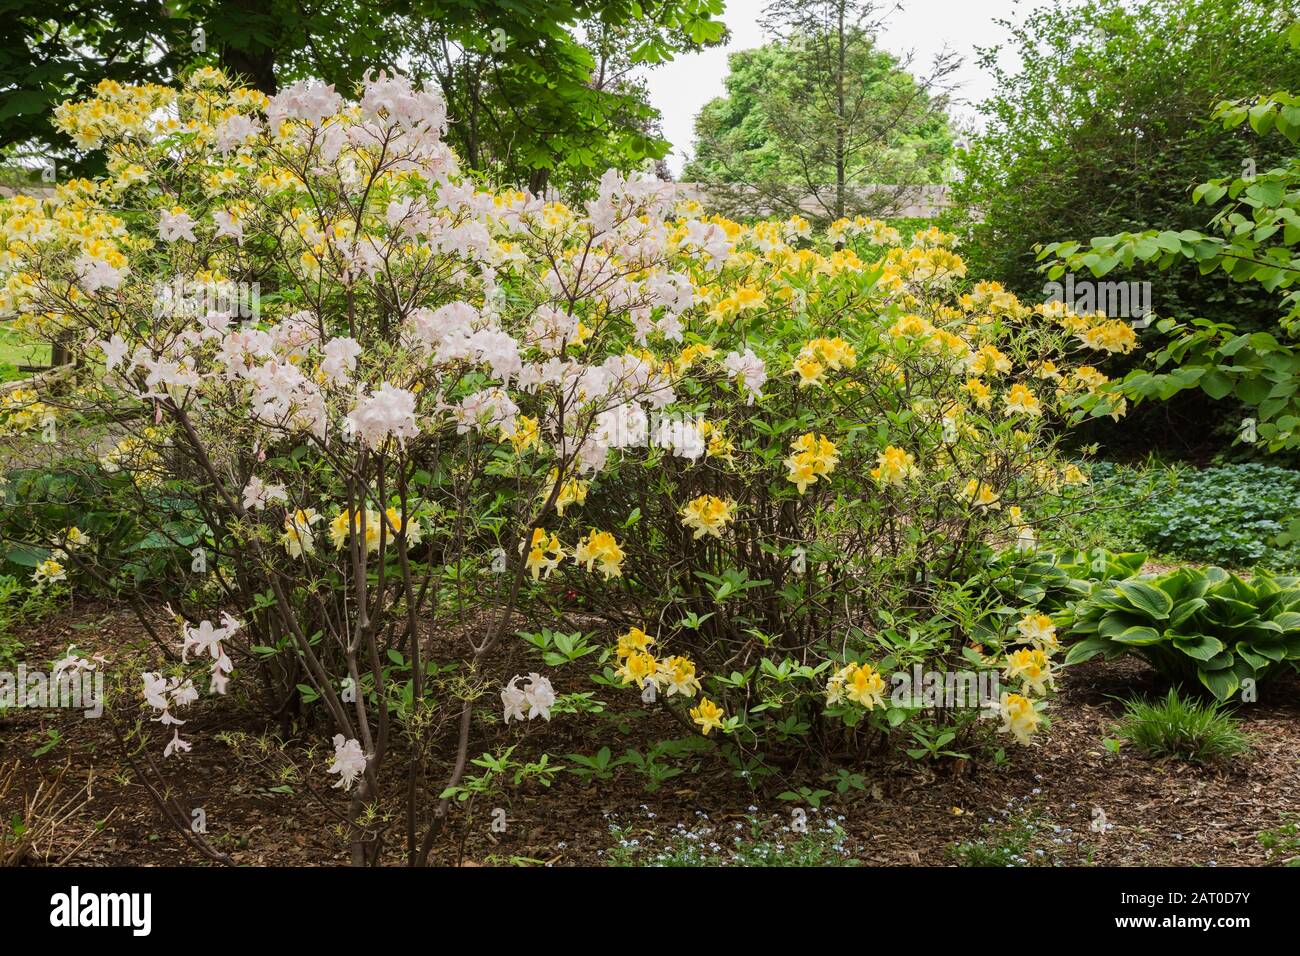 Mauve and yellow flowering Rhododendron shrubs, Hosta - Plaintain Lily plants in mulch border in spring Stock Photo